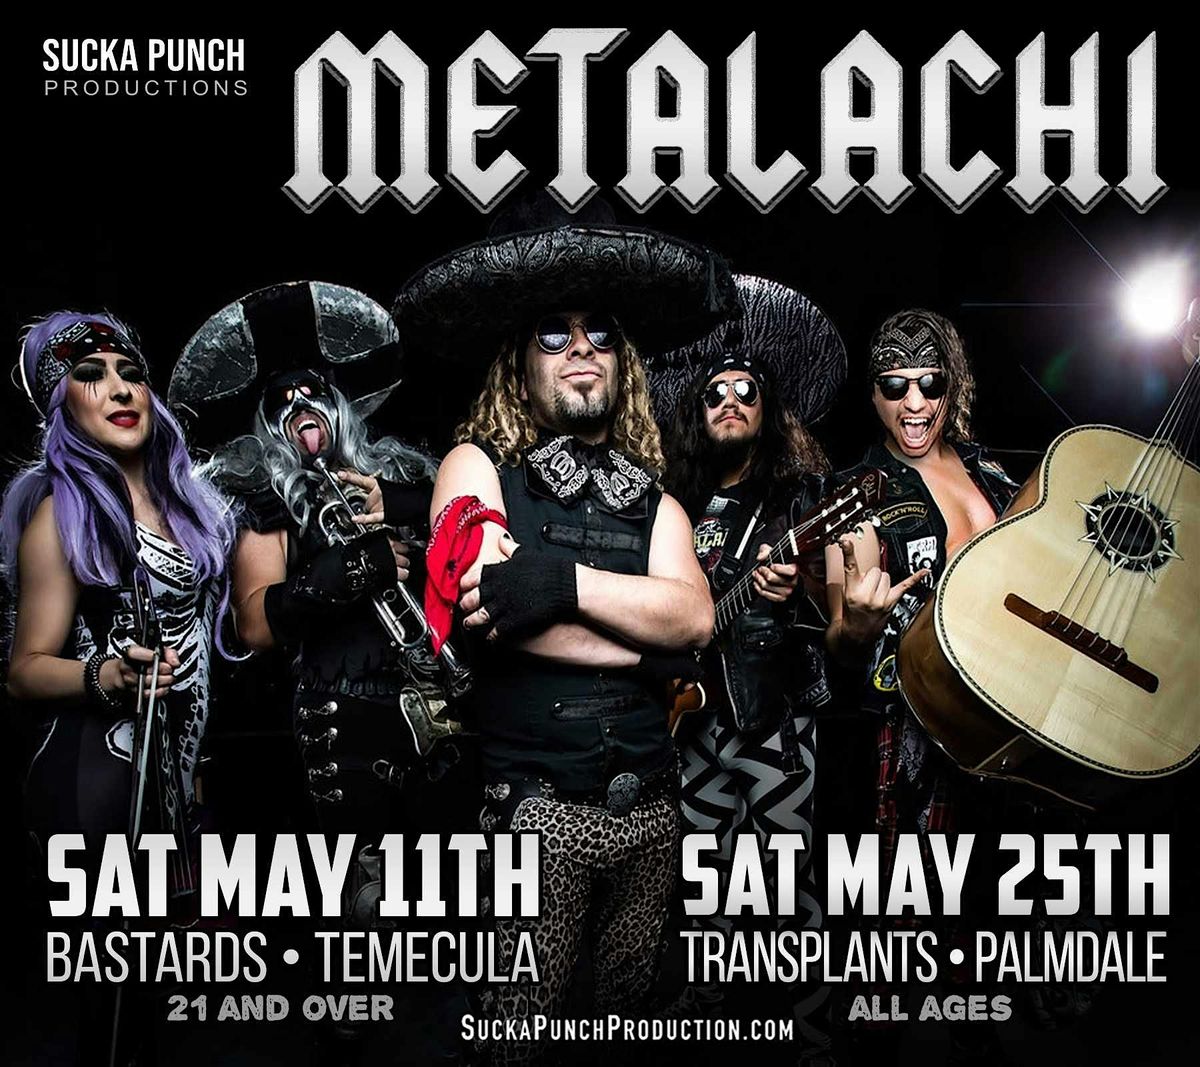 METALACHI LIVE IN CONCERT MAY 25TH AT TRANSPLANTS IN PALMDALE